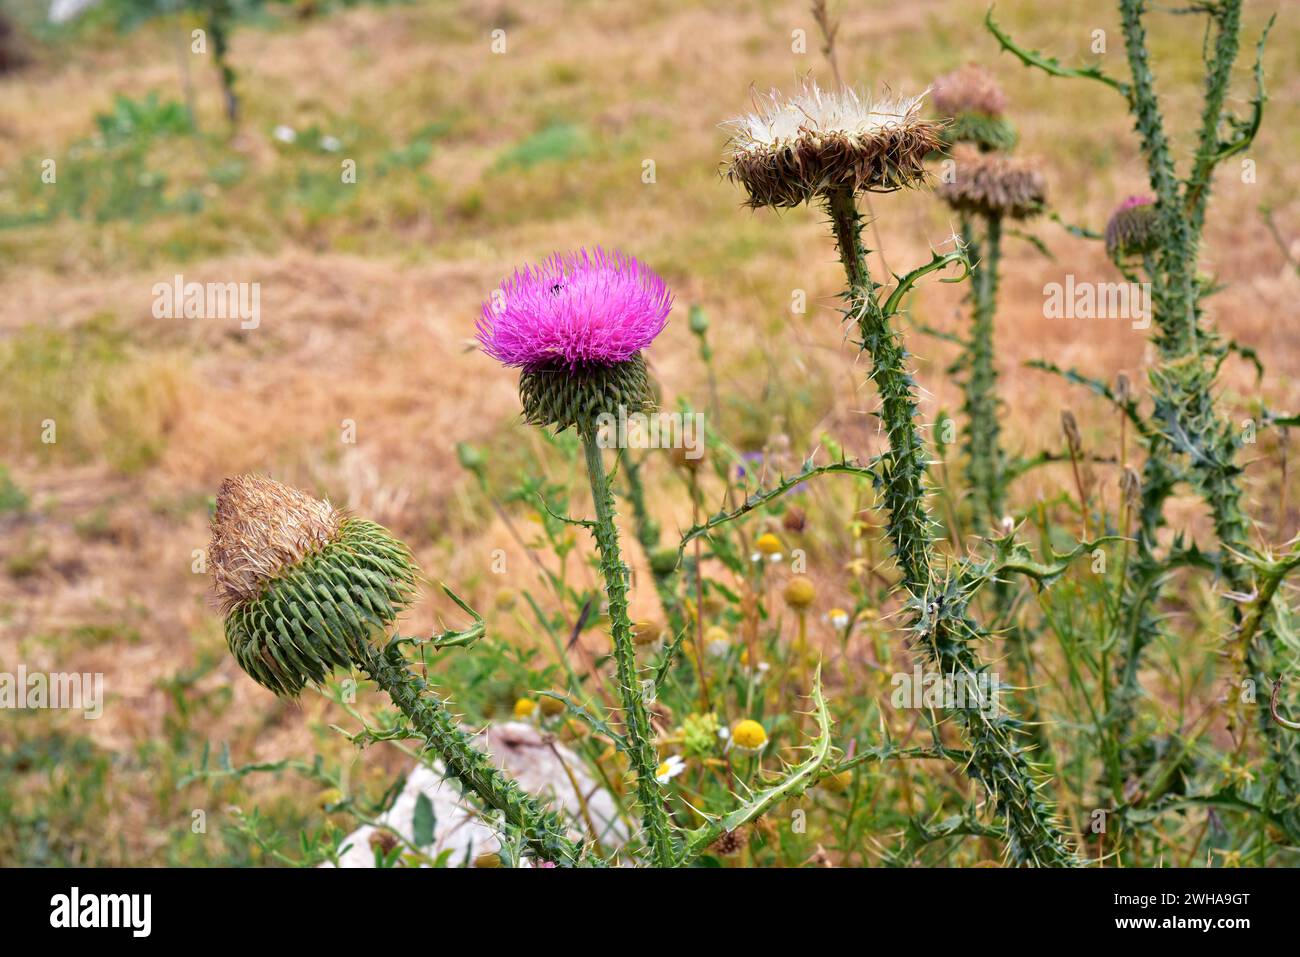 Carduus platypus granatensis is a spiny plant endemic to center and southern Spain mountains. This photo was taken in Sierra Nevada National Park, Gra Stock Photo